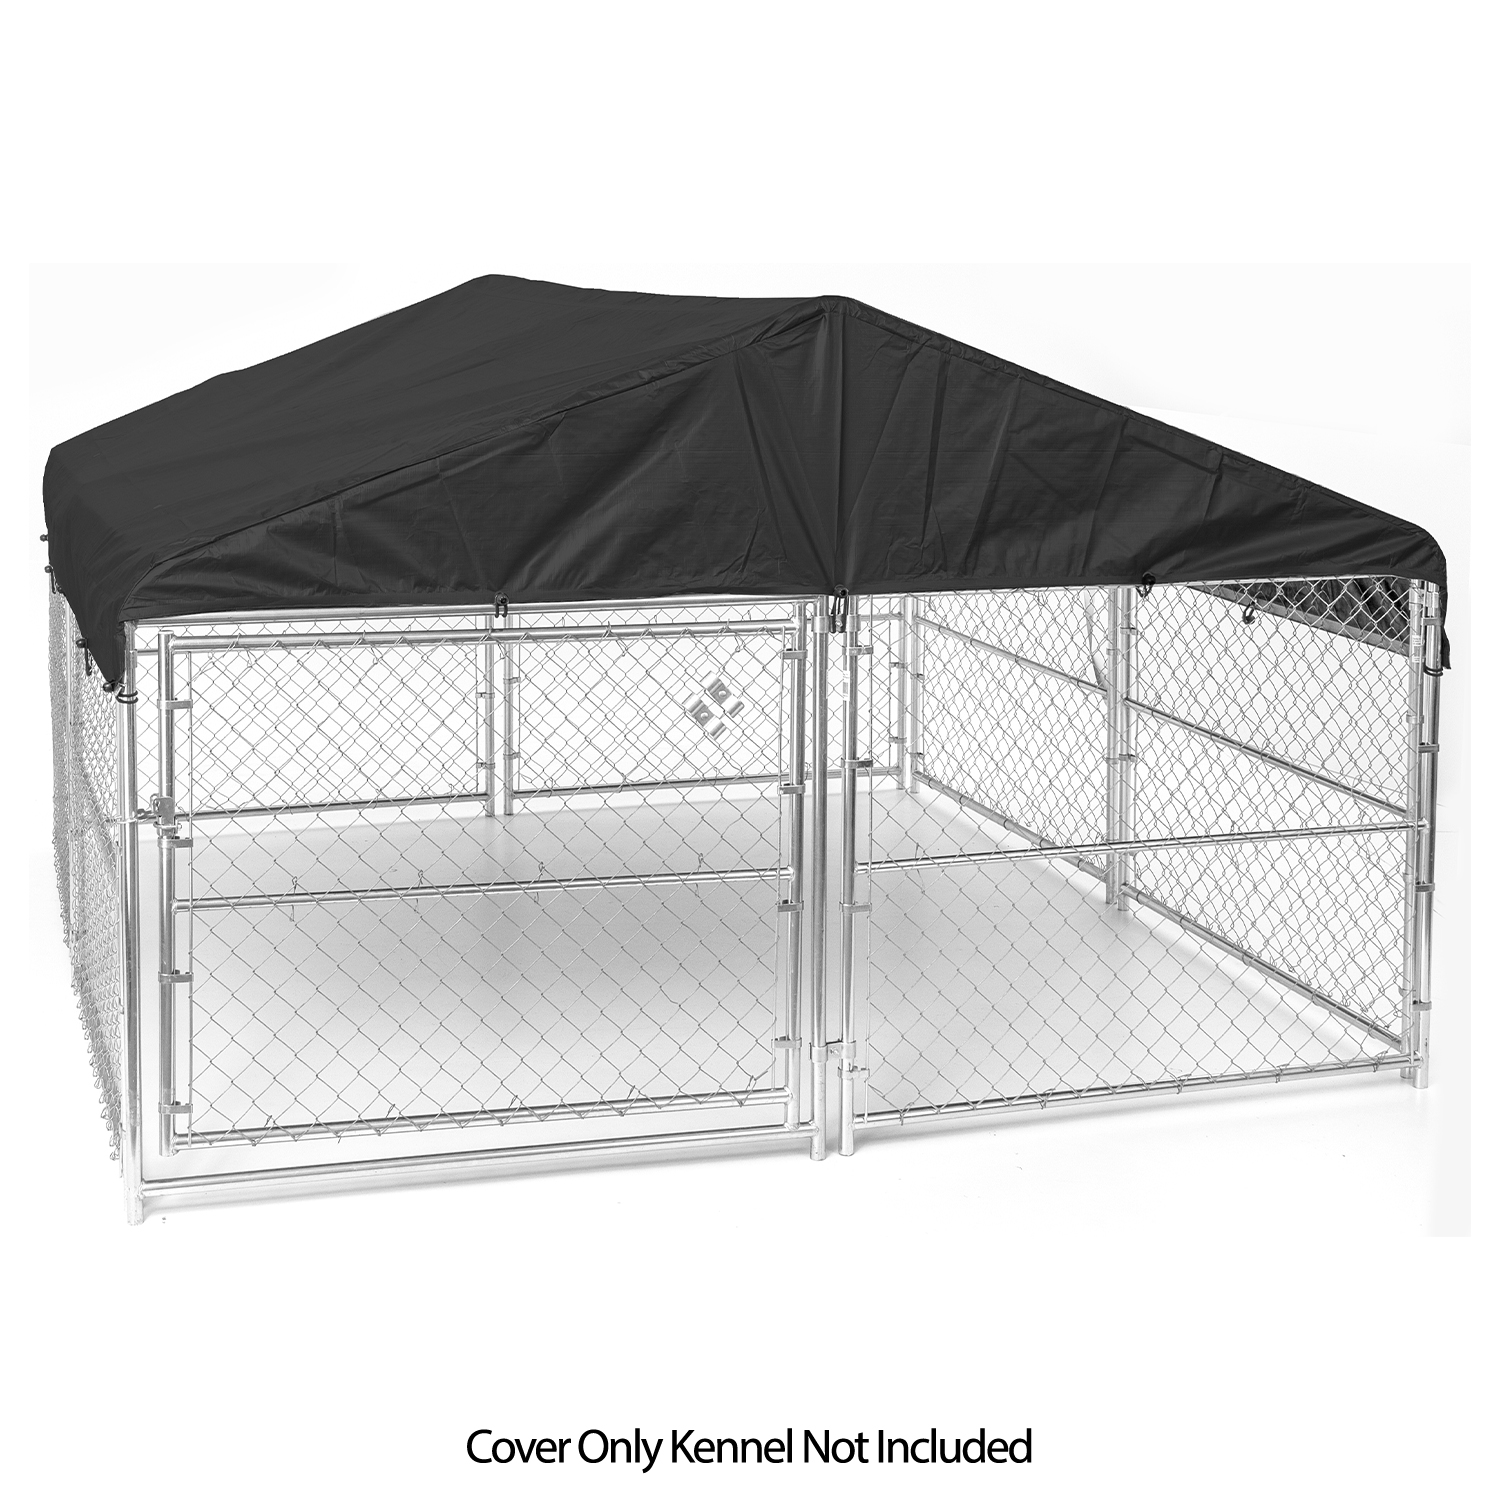 WeatherGuard 10' x 10' Outdoor Dog Kennel Waterproof Cover, No Kennel Included 760582003034 eBay